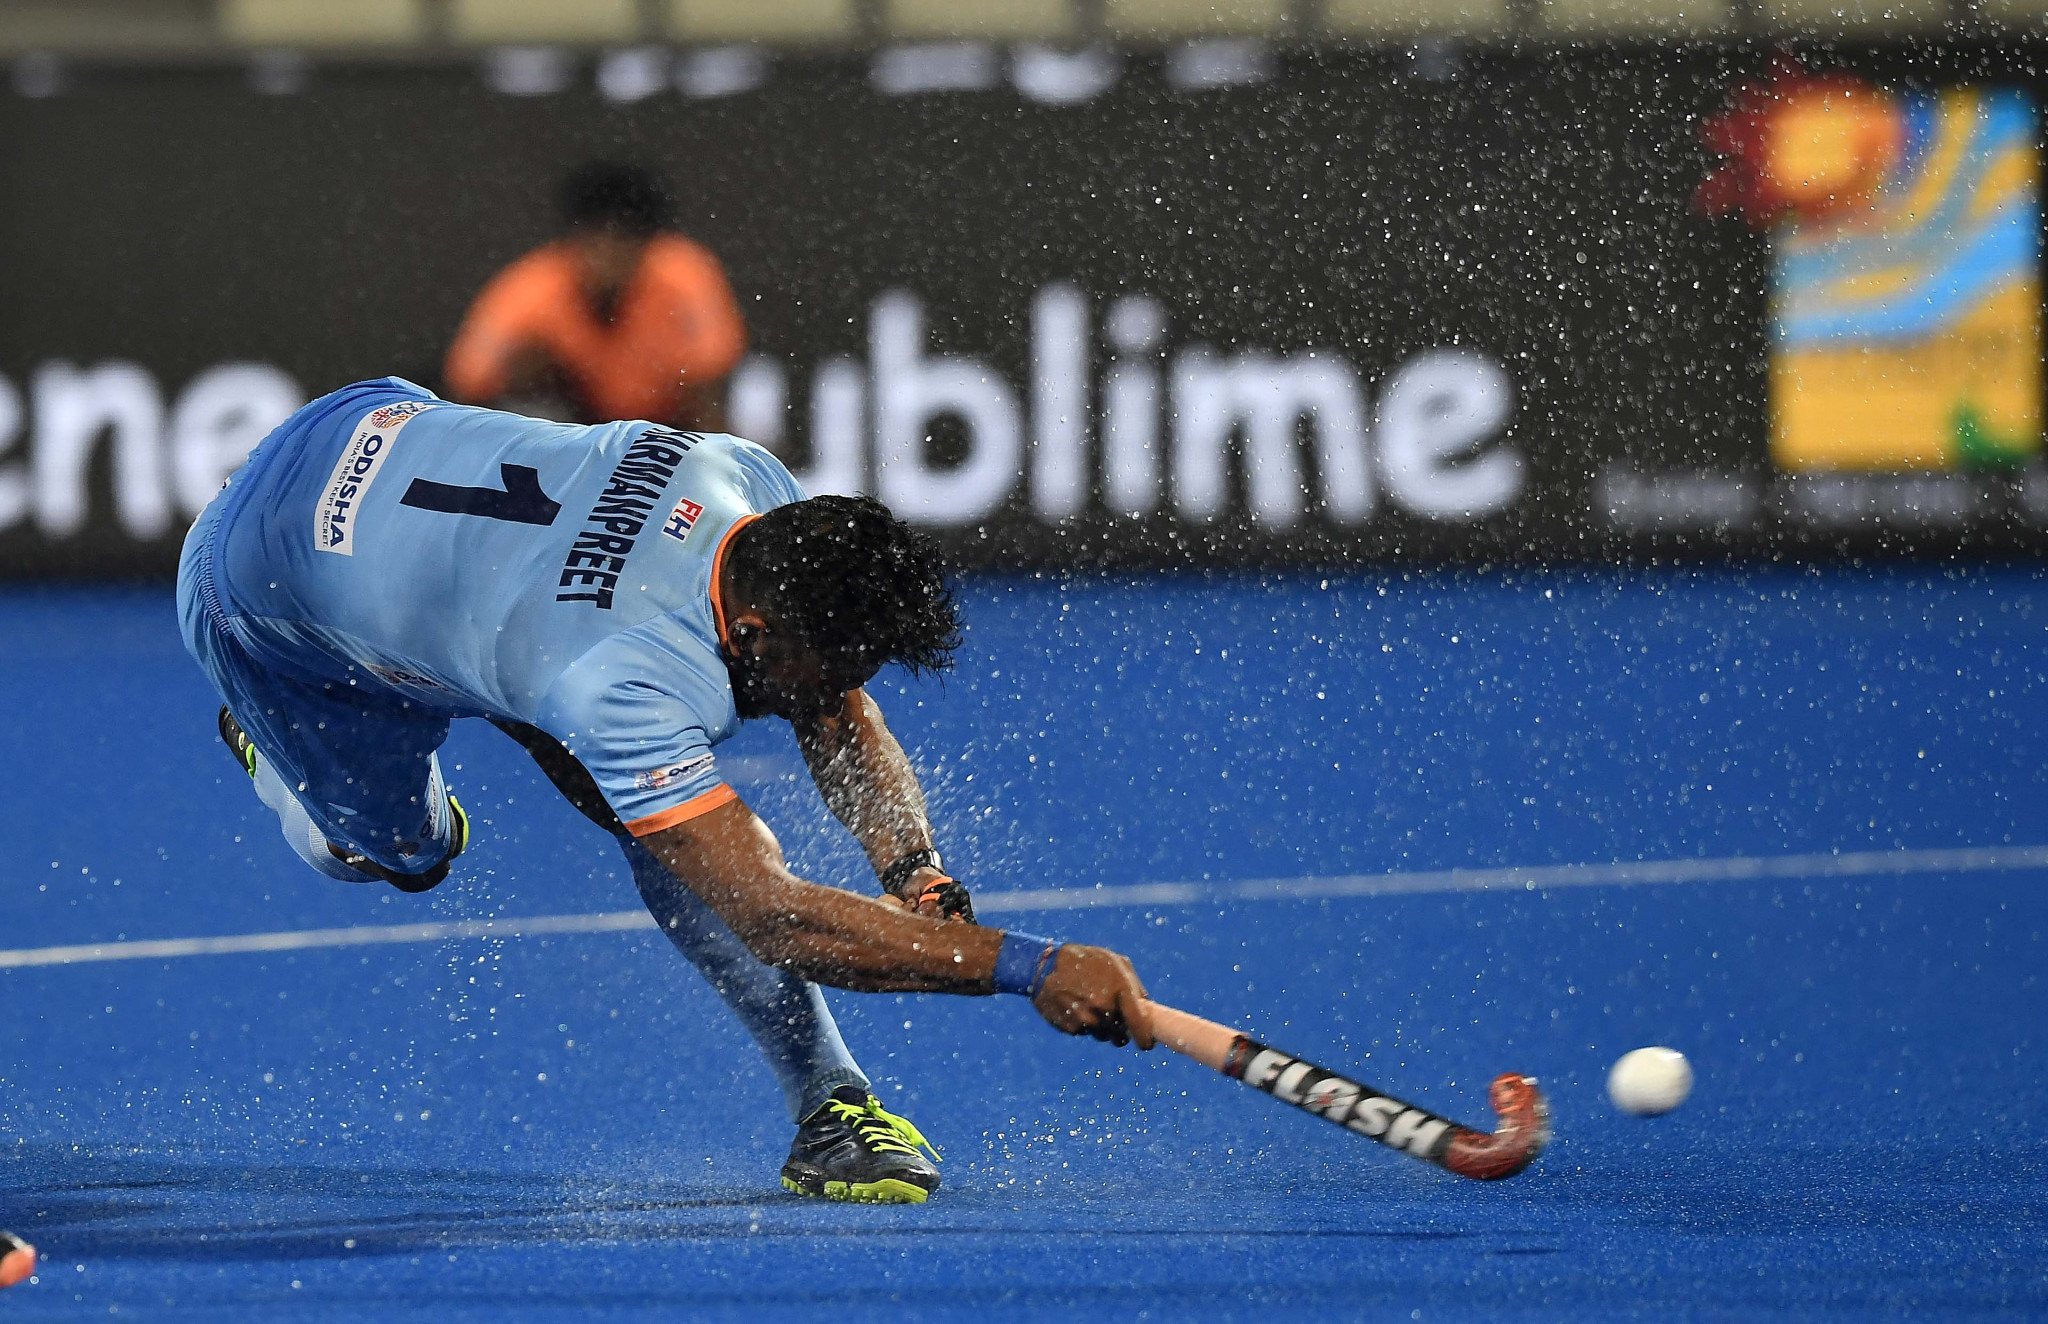 Harmanpreet Singh opened the scoring in India's 3-0 victory ©Getty Images